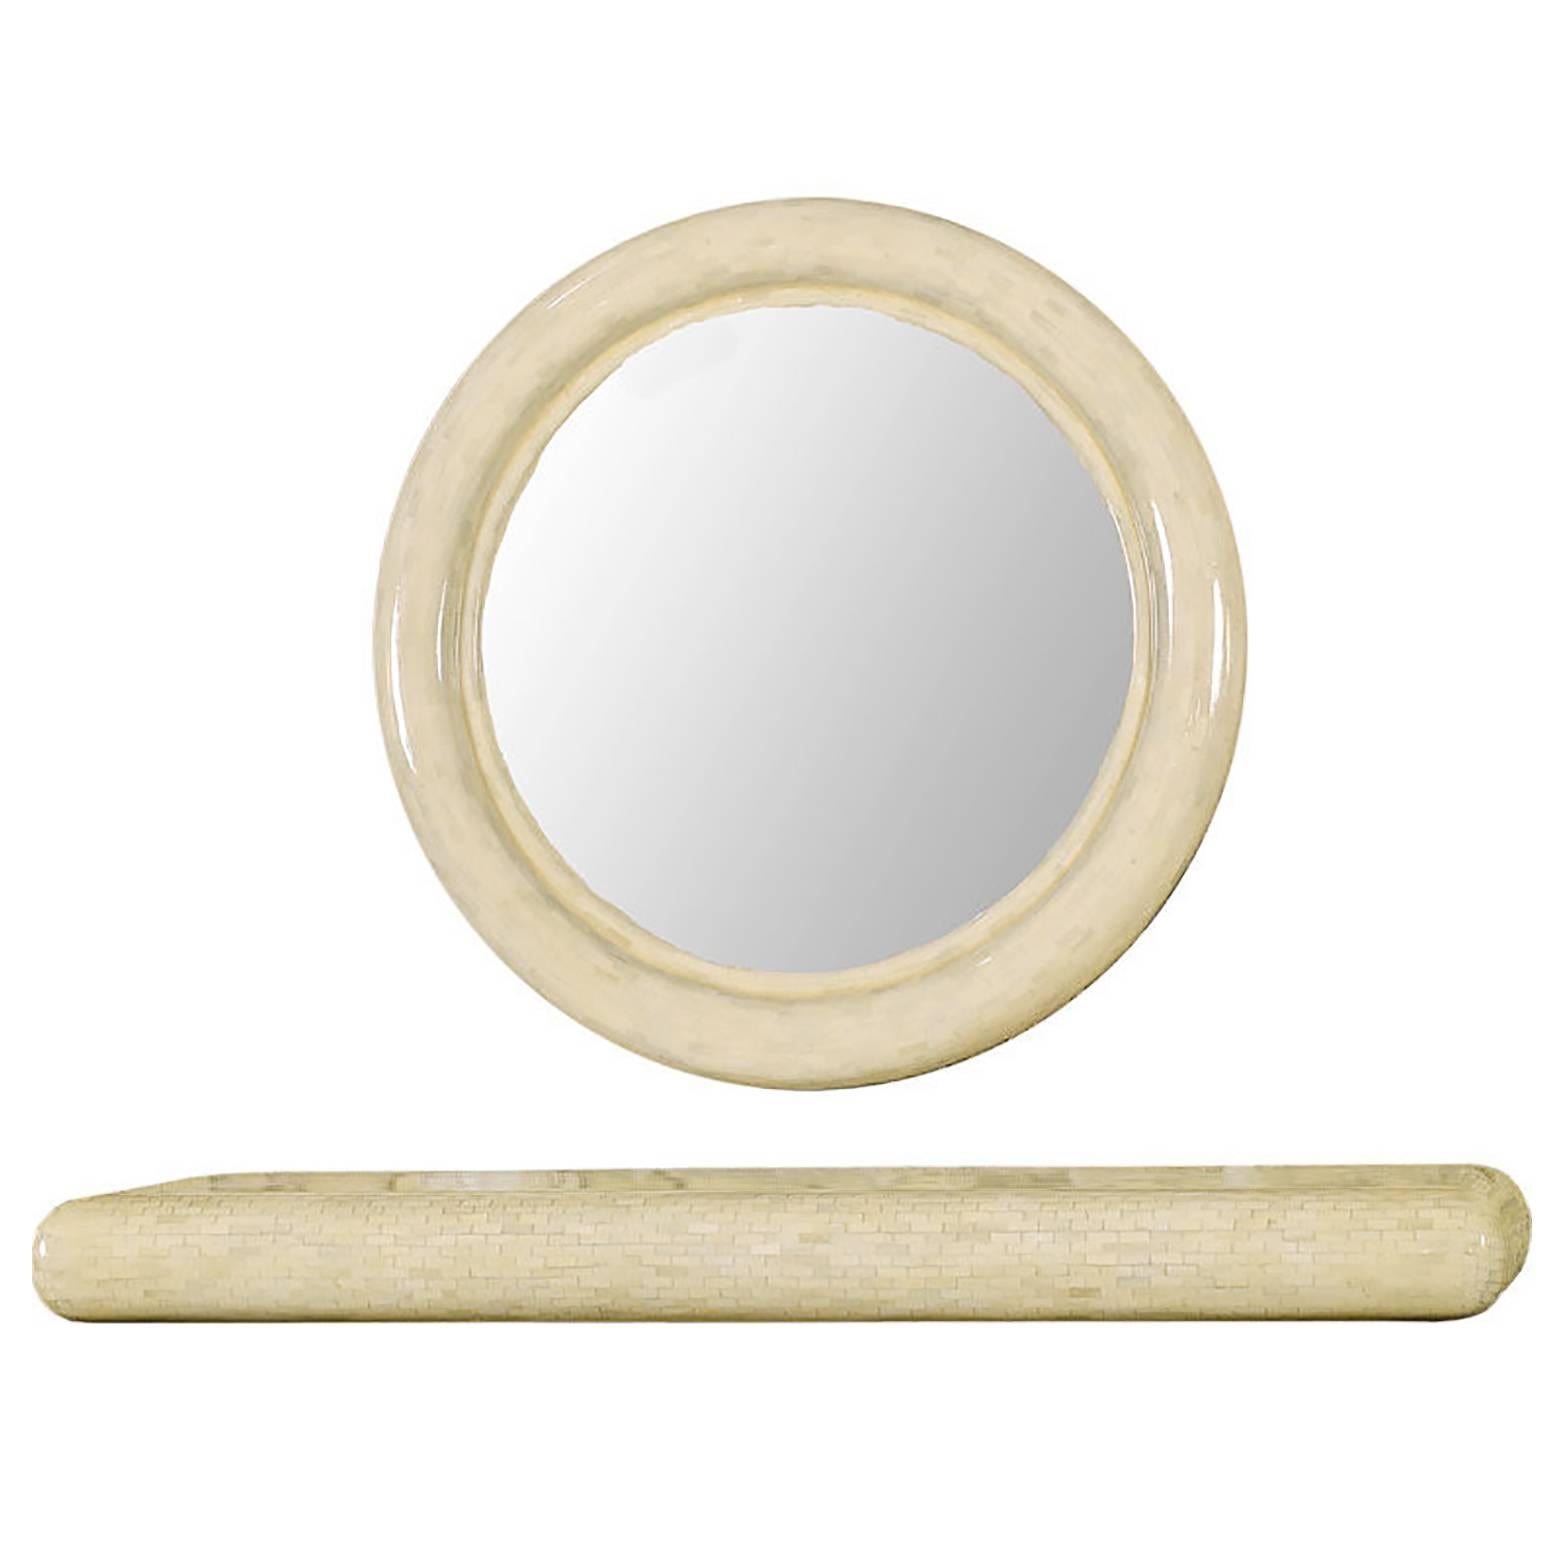 Round Tessellated Bone Mirror with Wall Mounted Console Table